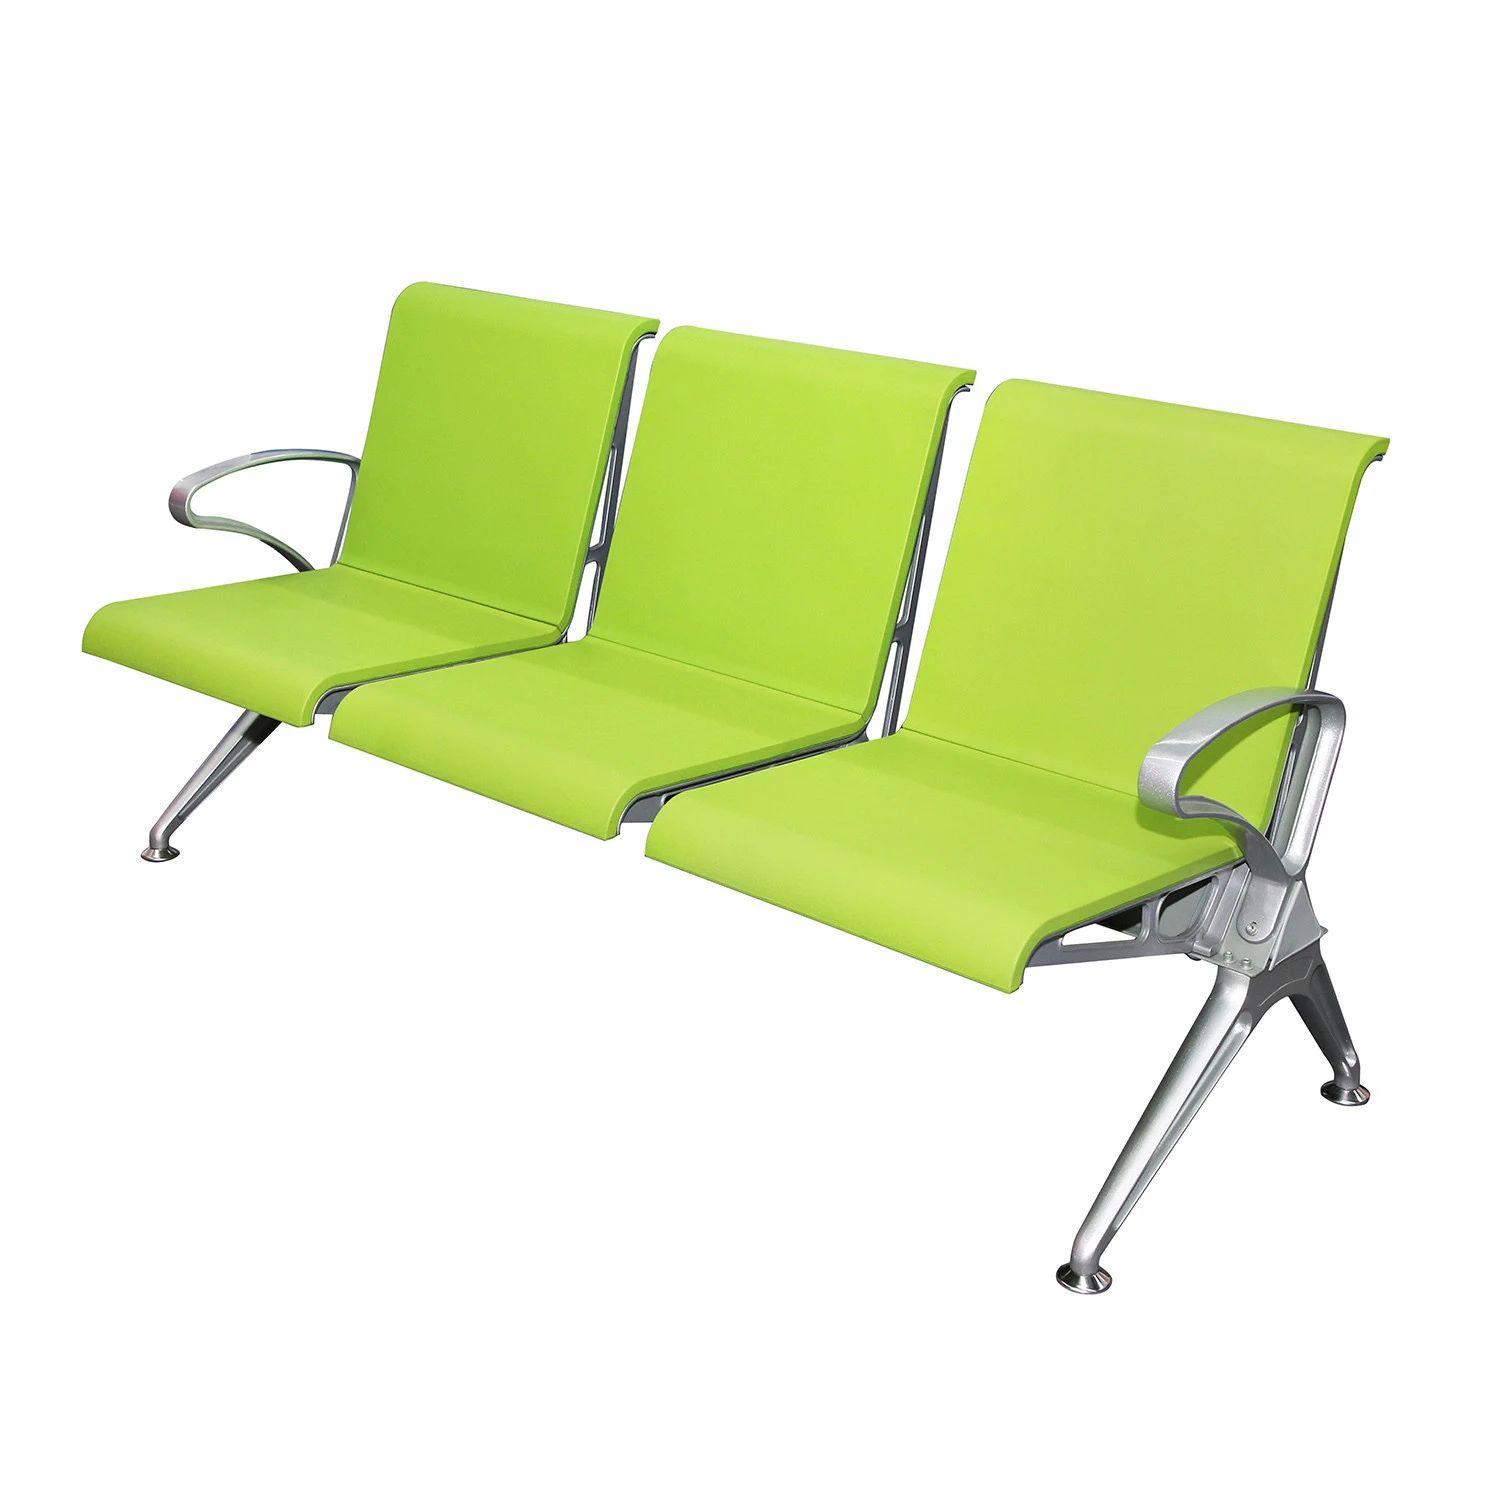 Hospital clinic airport waiting lounge bank 3-seater waiting room gang seating chair